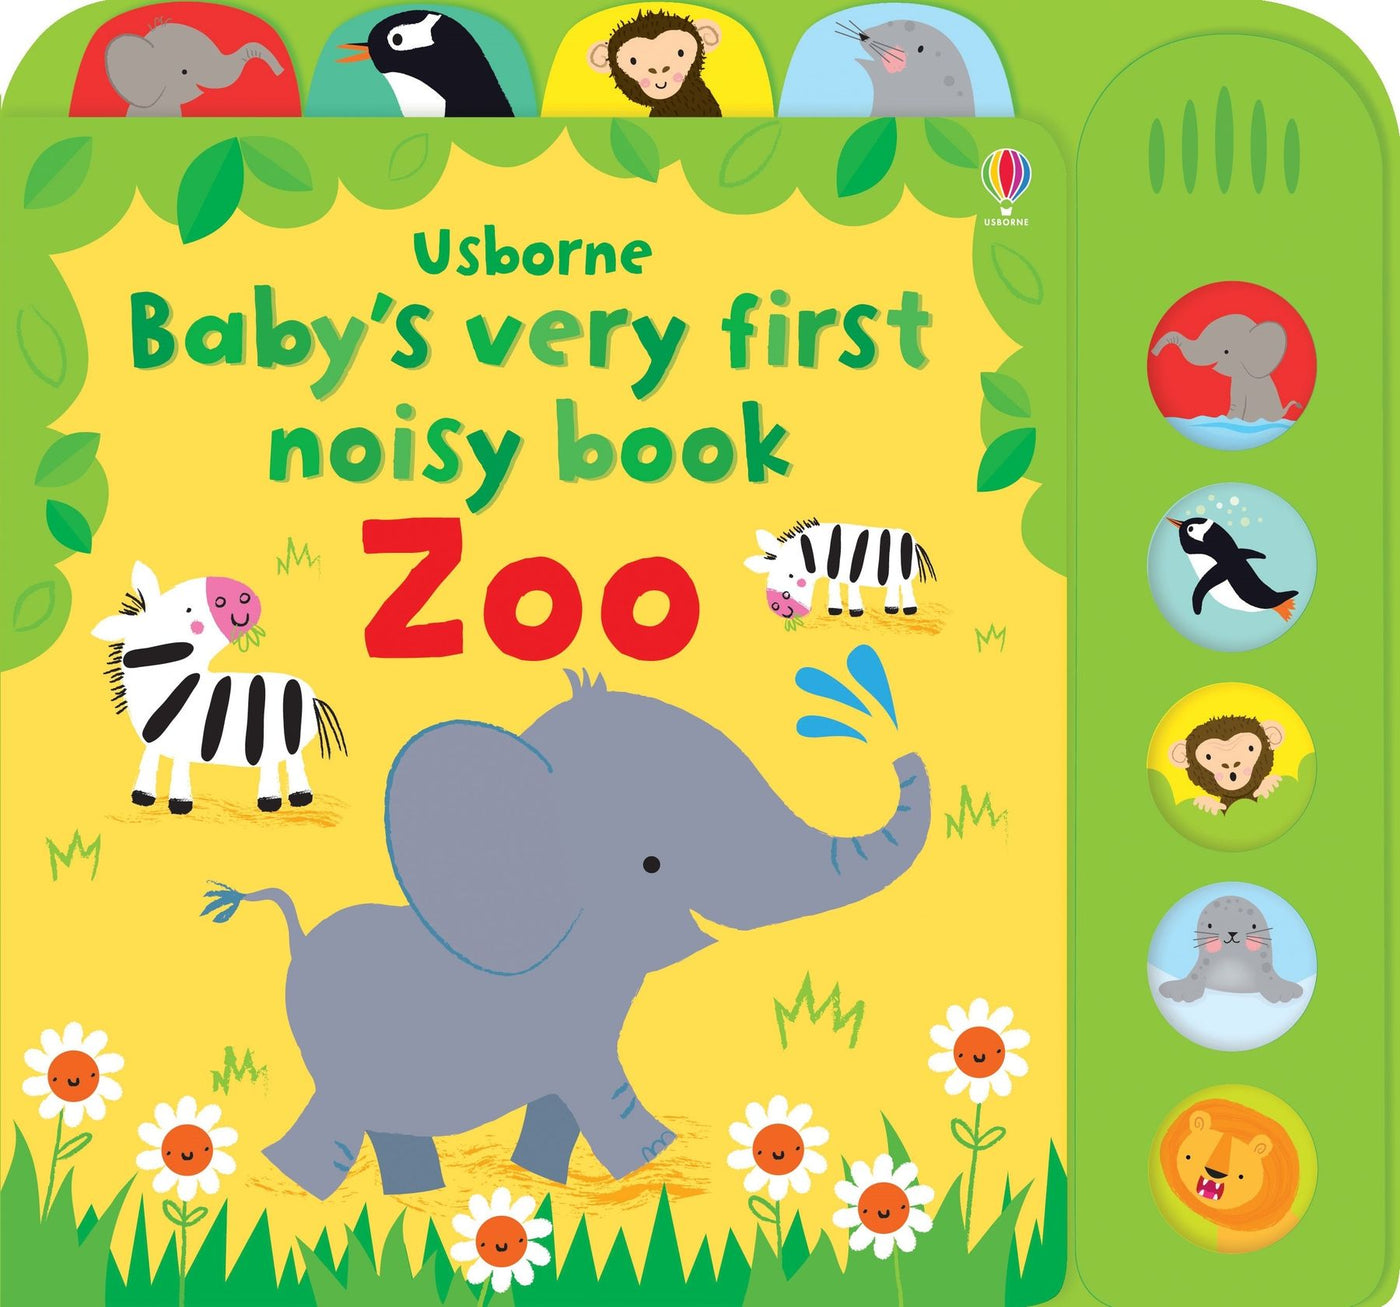 Baby's Very First Noisy book Zoo - Board Book | Usborne